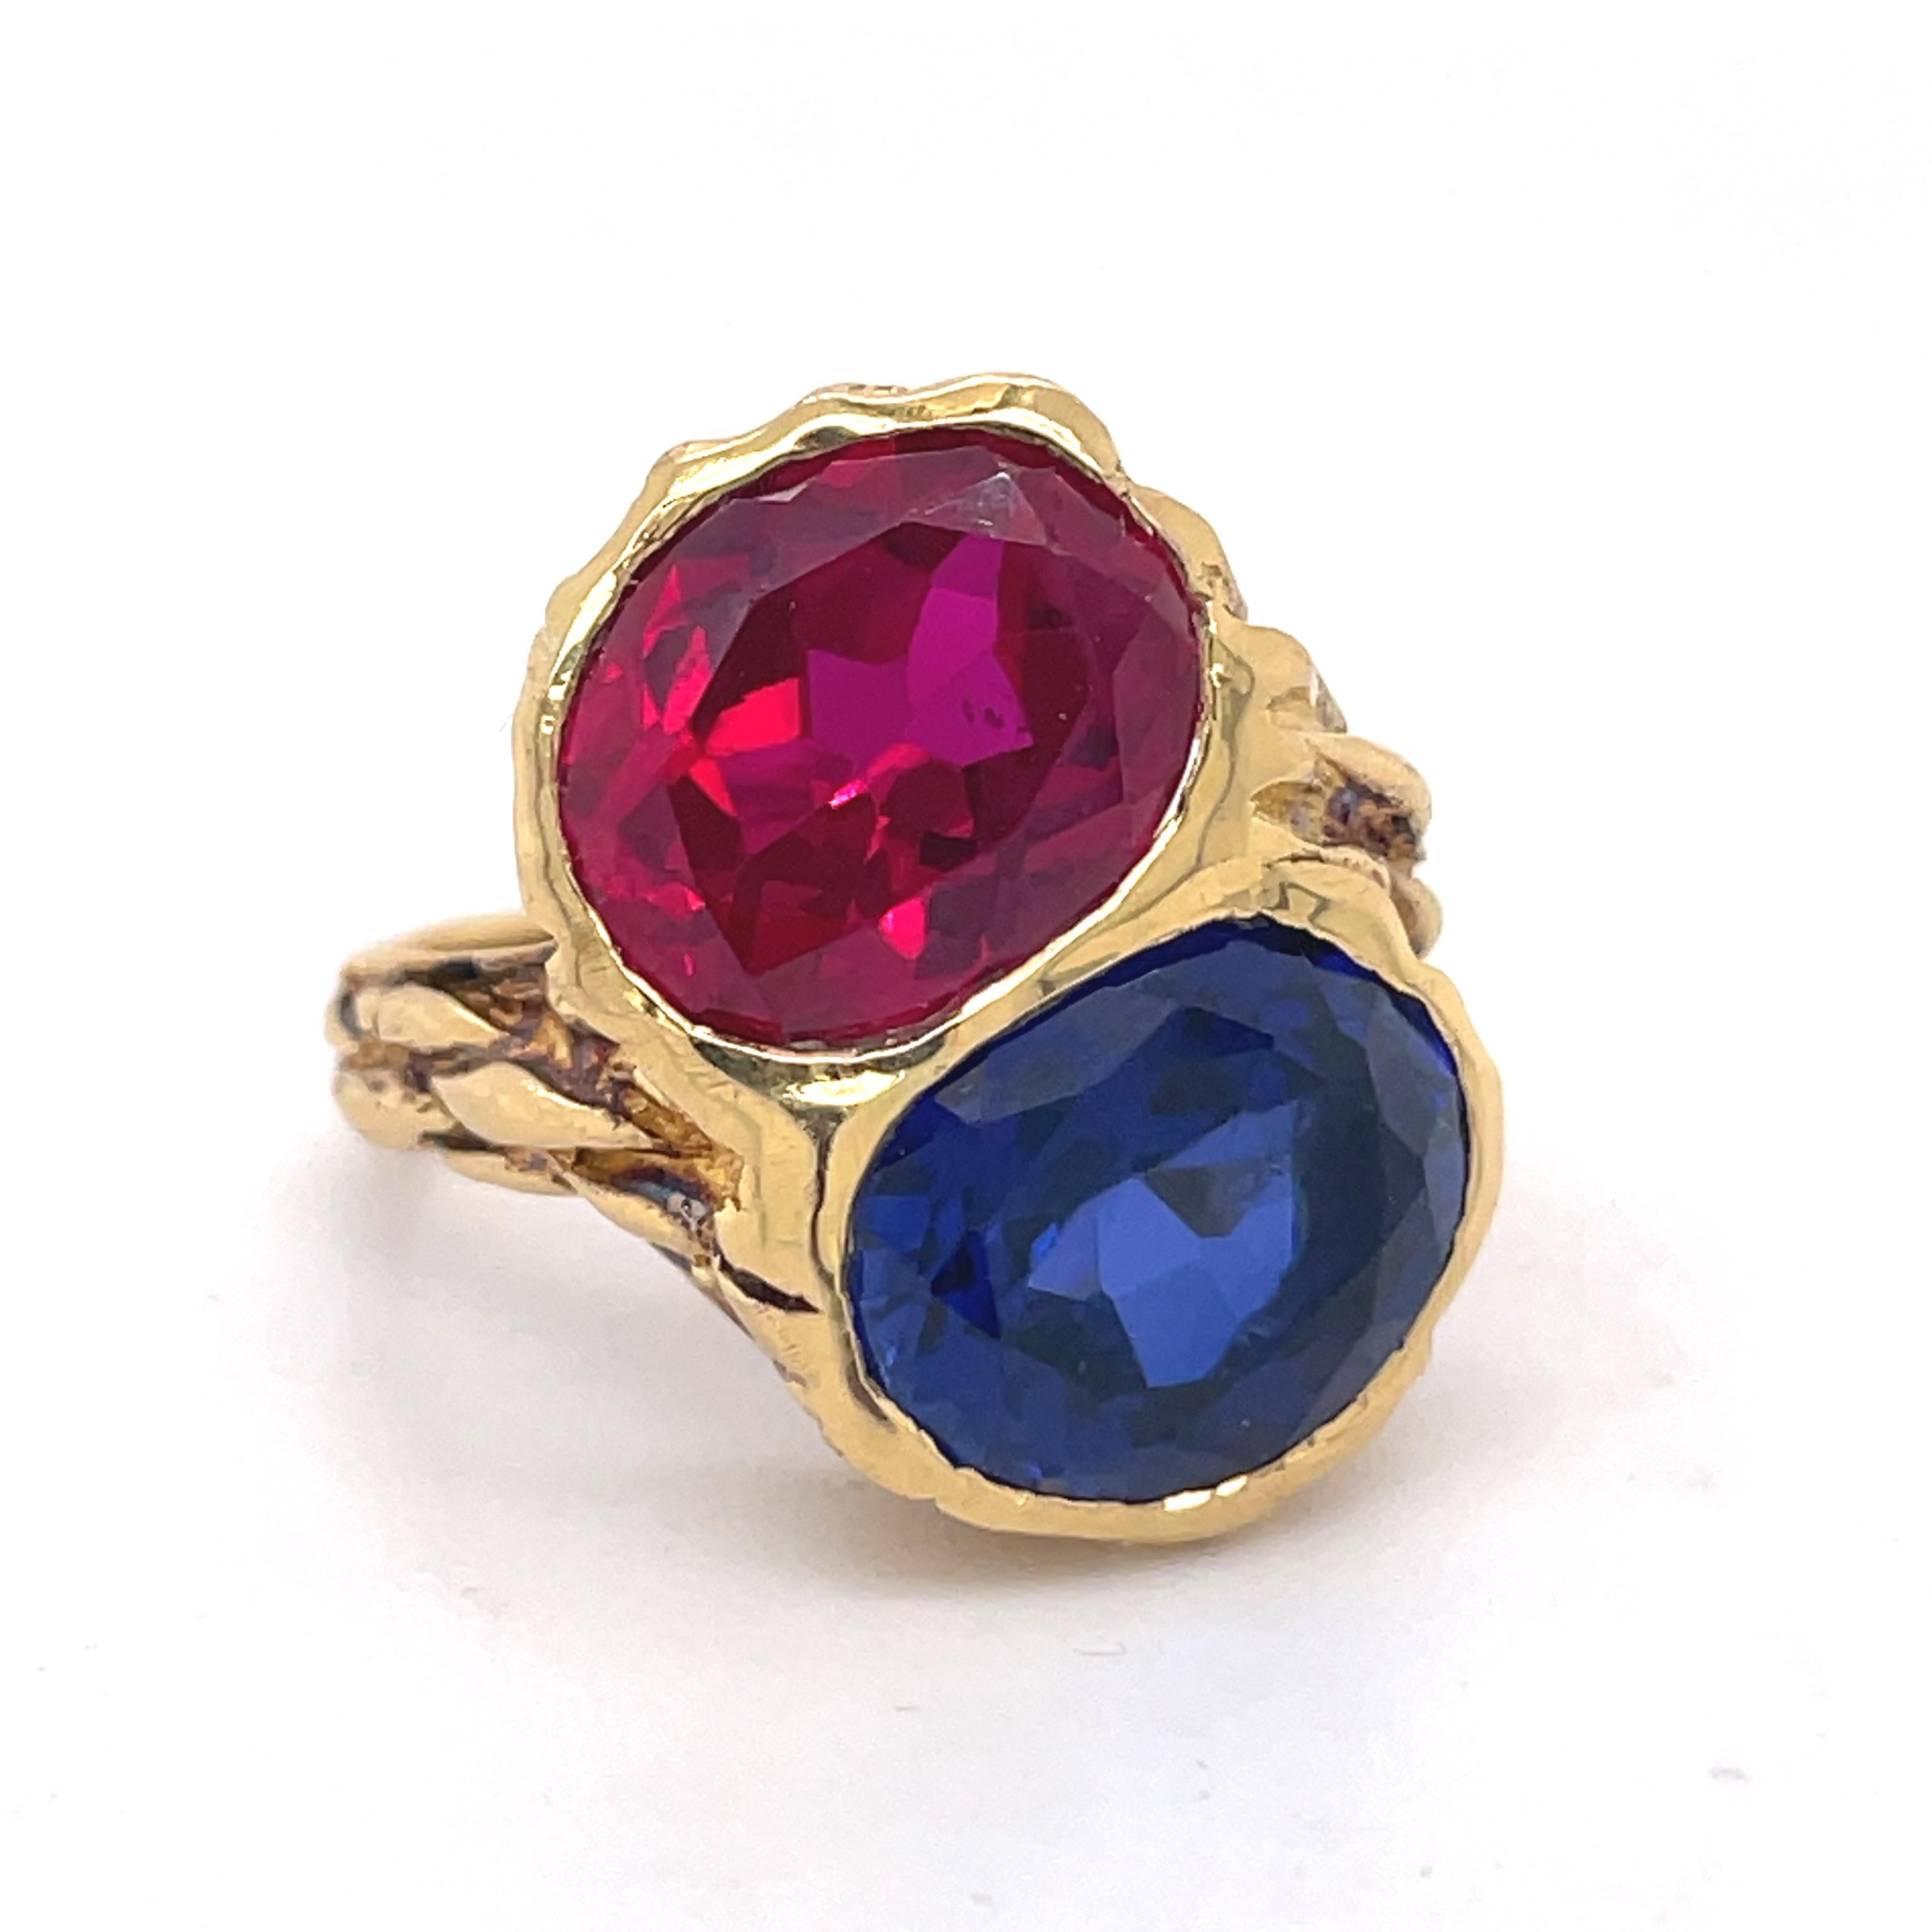 Toi Et Moi Engagement Ring - Synthetic Ruby & Sapphire Toi Et Moi Ring, 18K Yellow gold, Statement Ring, Estate jewelry, unique jewelry, birthstone jewelry, unique ring, Hand Made
 

Jewelry Yellow Gold 18k (the gold has been tested by a